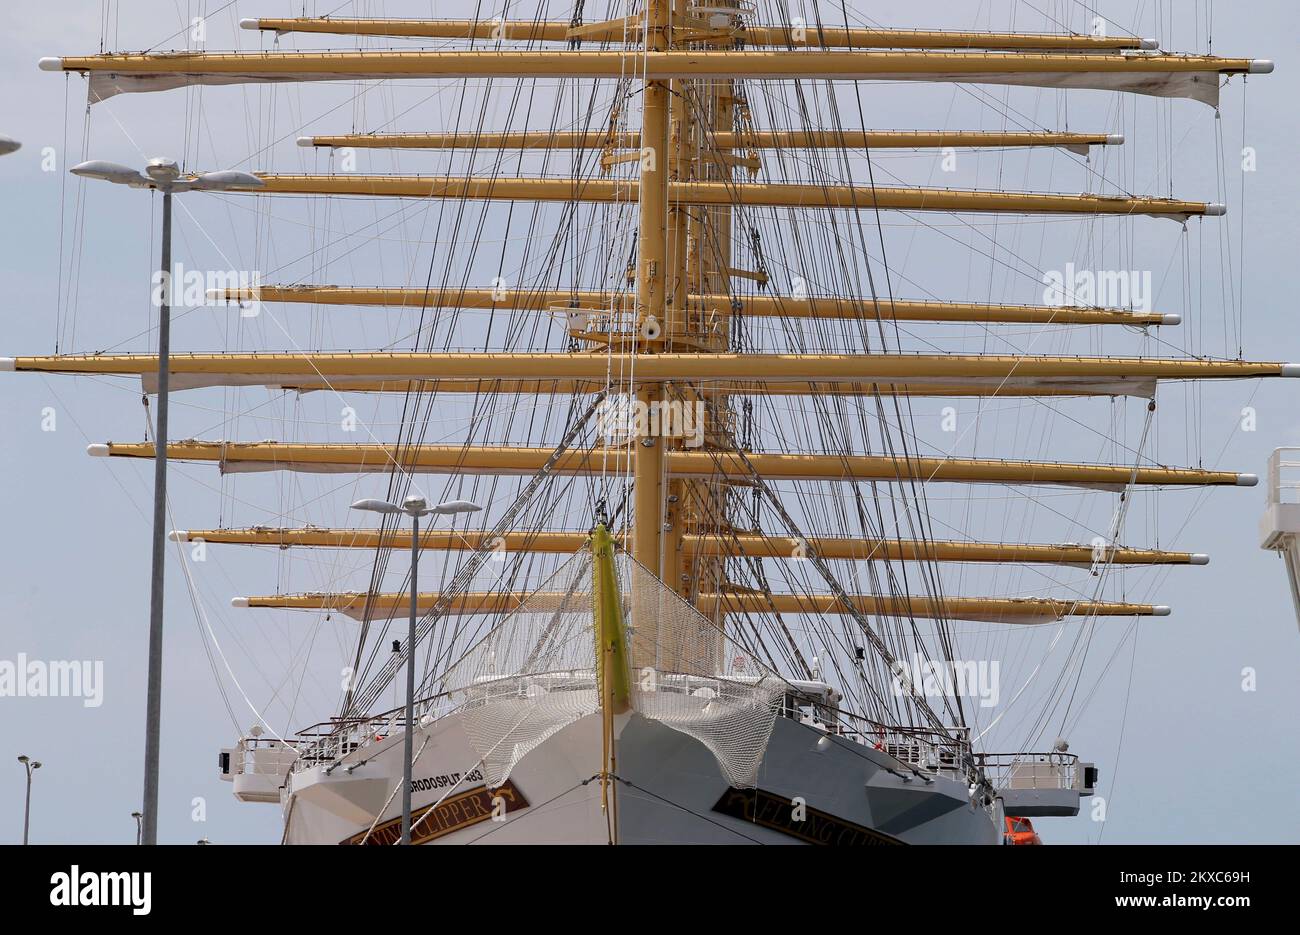 15.07.2019., Split, Croatia - 162 meters long and 18.5 meters wide, with a deadweight of 2000 tons will have five masts and sails with the overall surface of 6.347 square meters. The type of clipper sailing boat with such sail-plan is called Bark. Flying Clipper has five decks, with accommodation for 450 persons, 300 passengers in 150 luxury cabins, and 74 crew cabins for 150 crew members. Photo: Ivo Cagalj/PIXSELL  Stock Photo